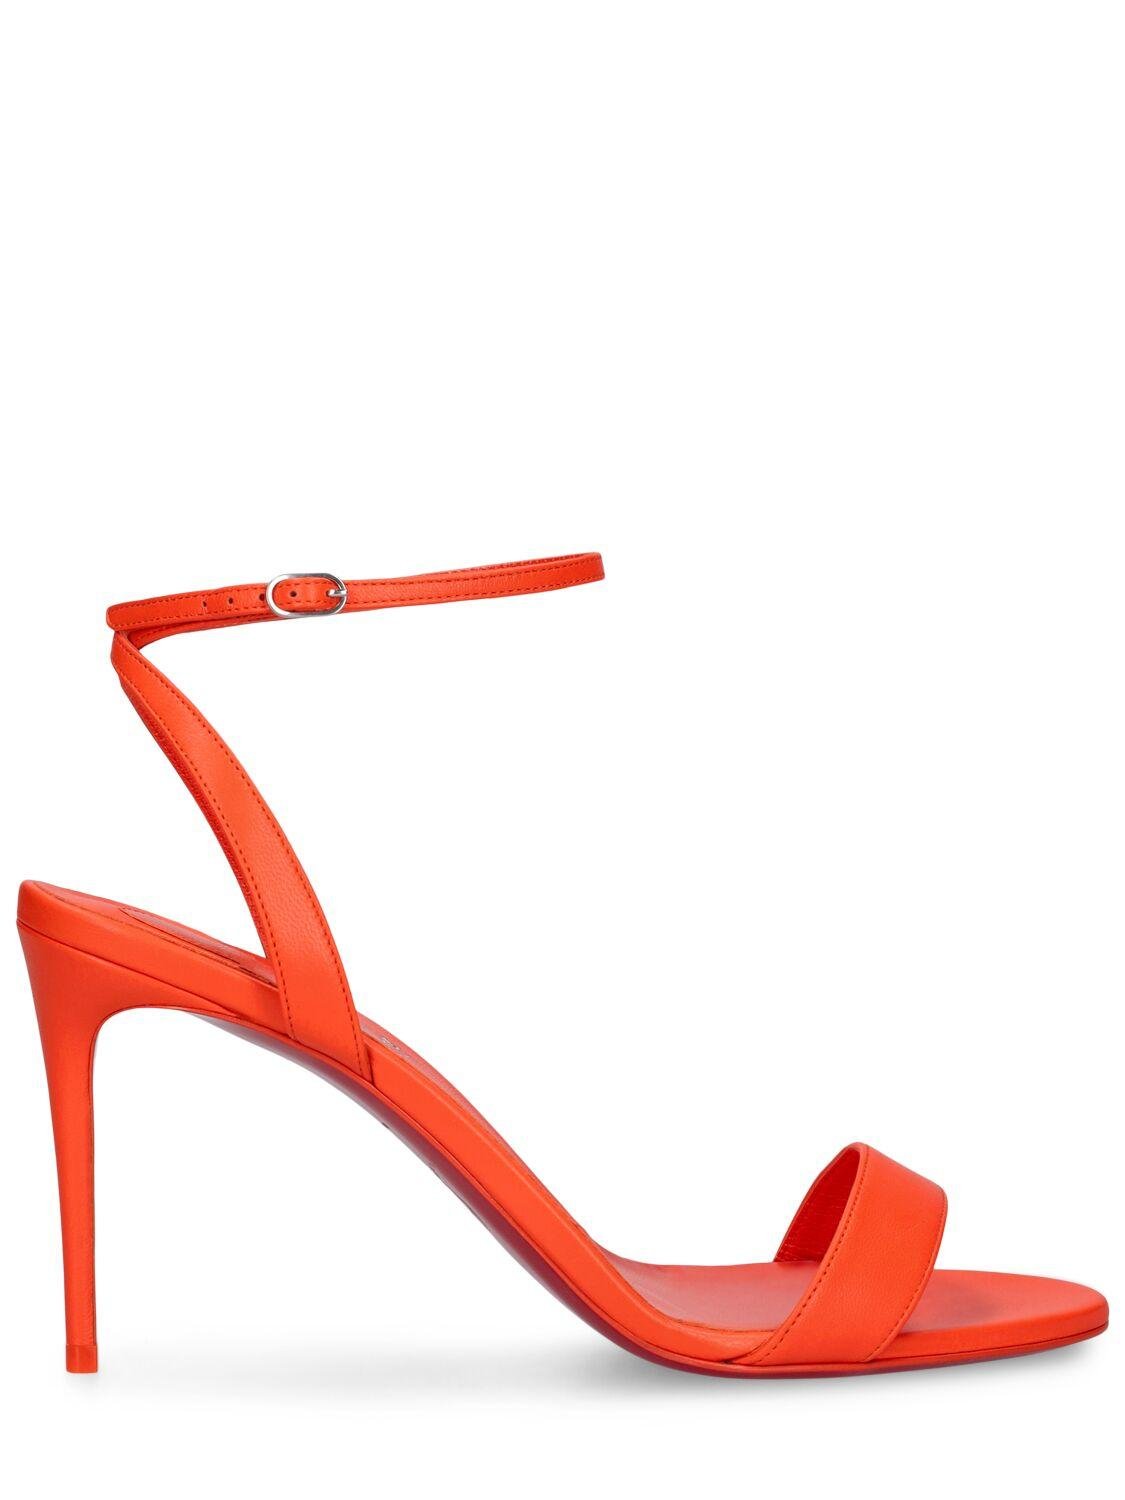 85mm Loubigirl Leather Sandals by CHRISTIAN LOUBOUTIN